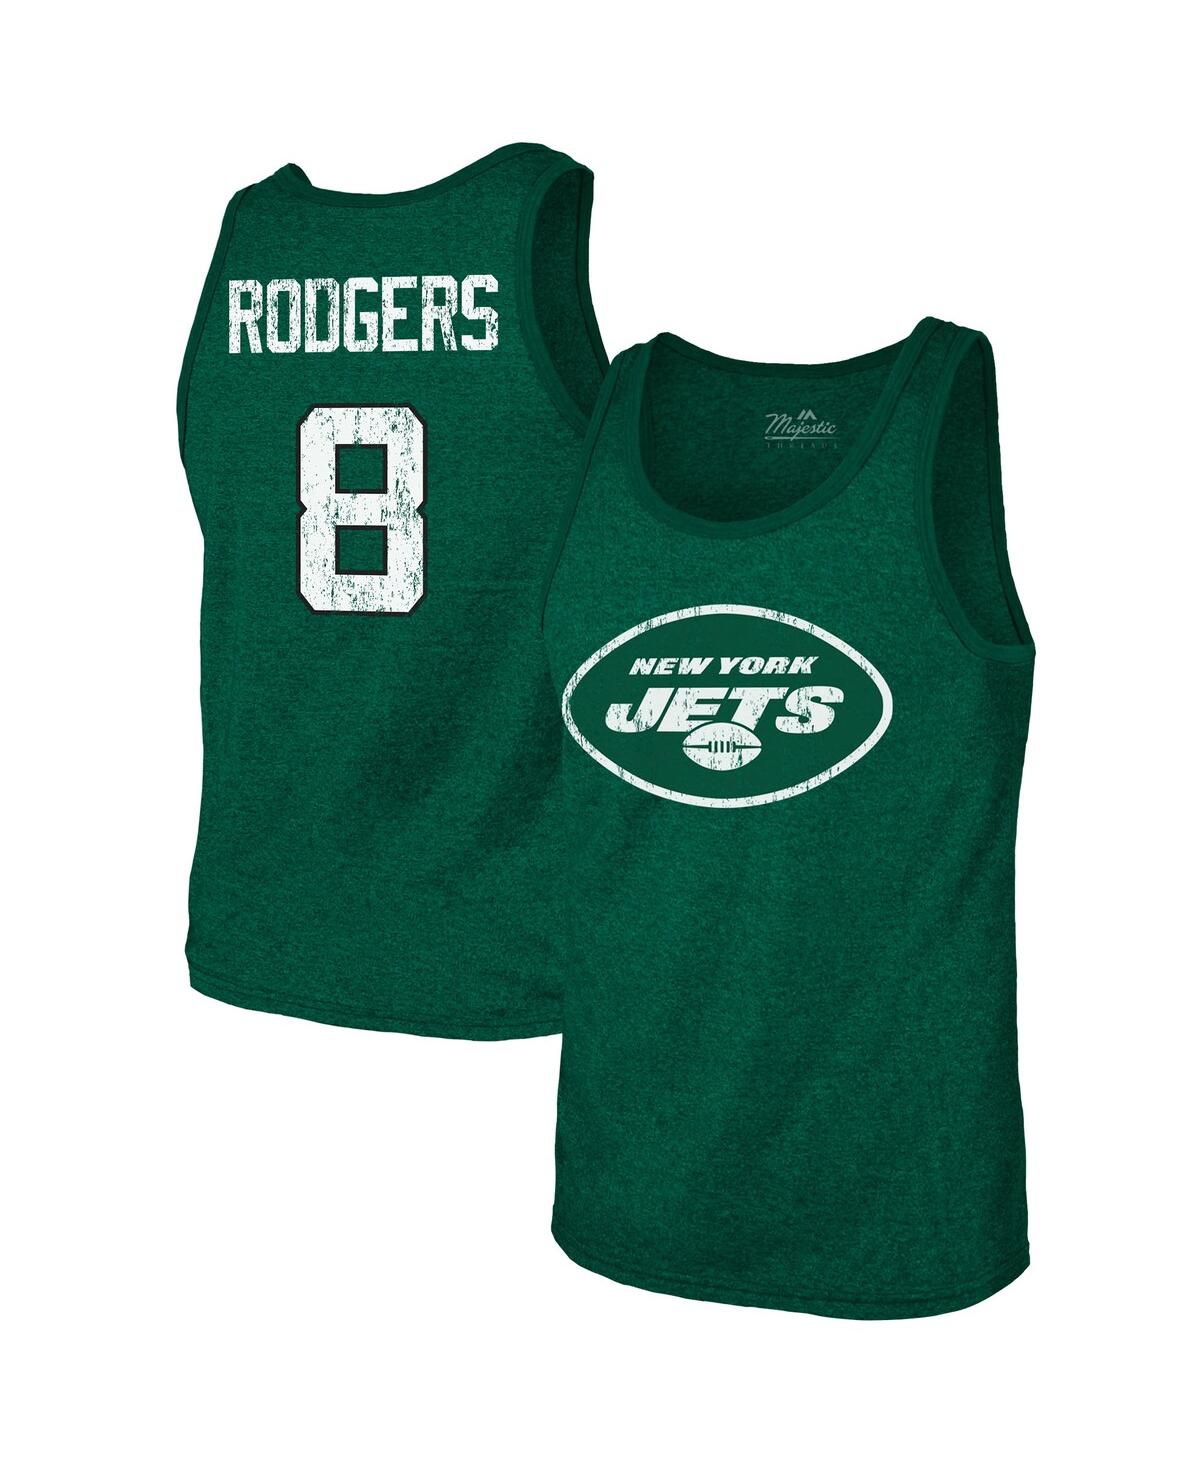 Men's Majestic Threads Aaron Rodgers Green New York Jets Player Name and Number Tri-Blend Tank Top - Green